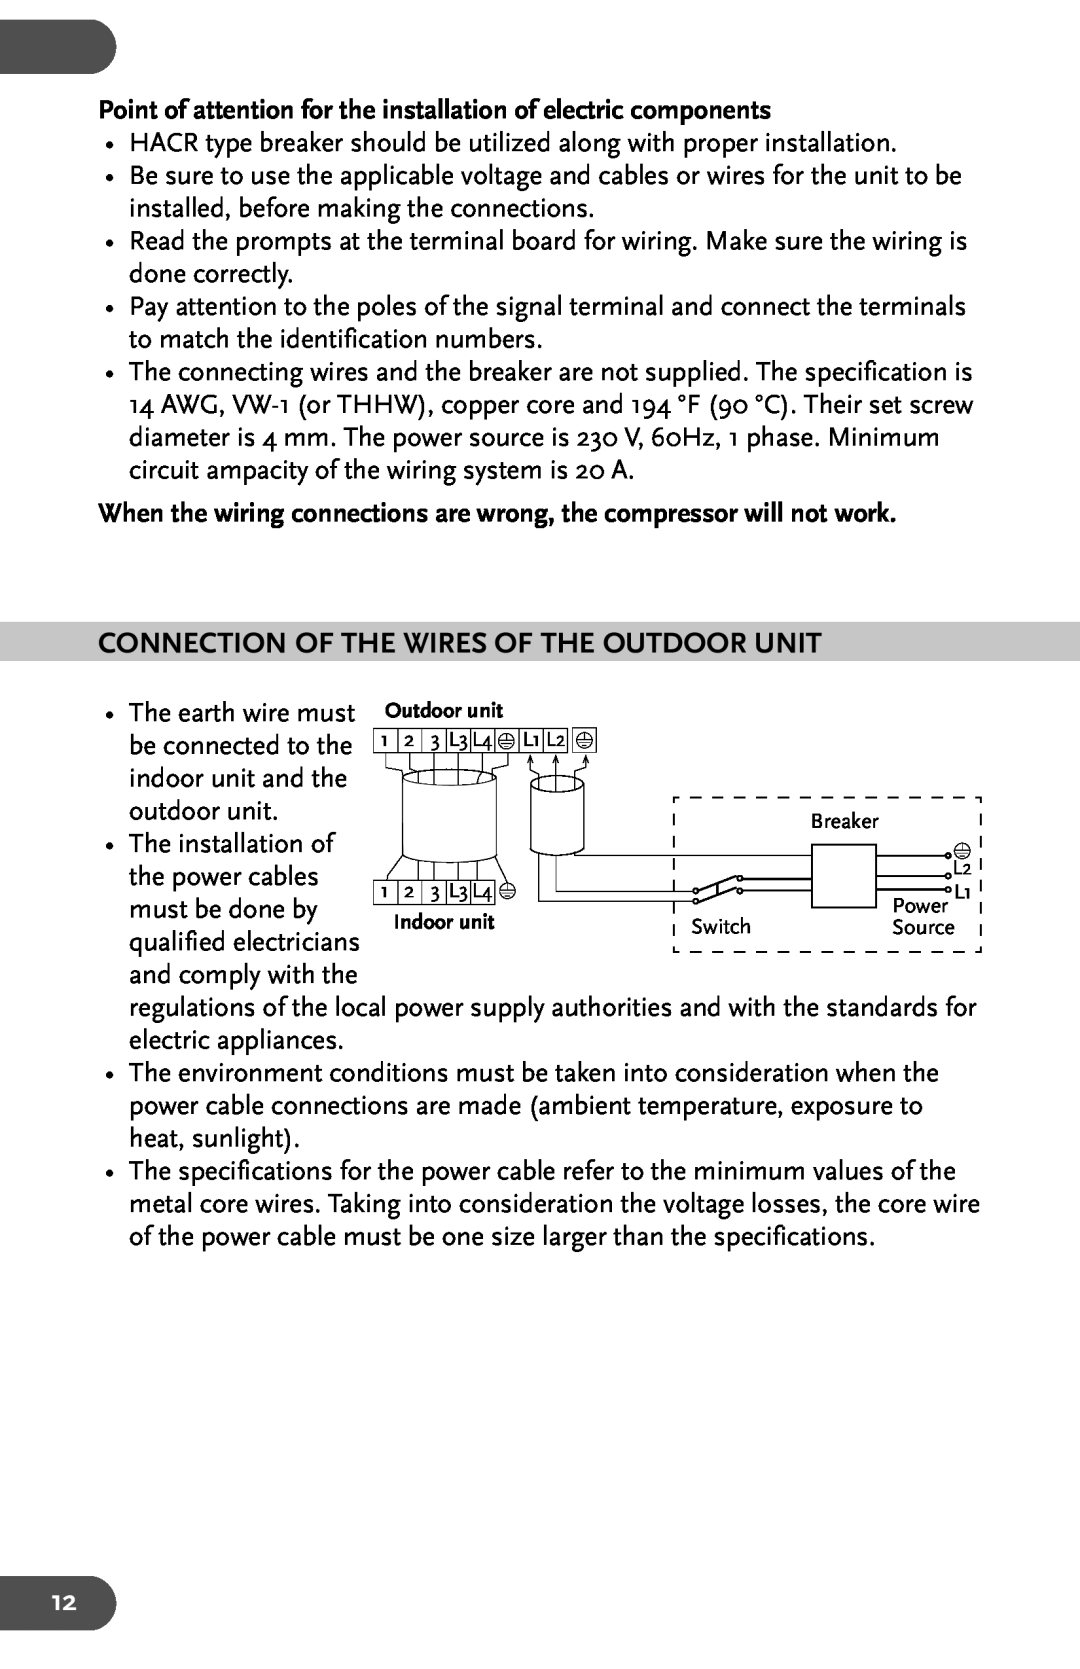 Amcor AHW 164 user manual Connection Of The Wires Of The Outdoor Unit 